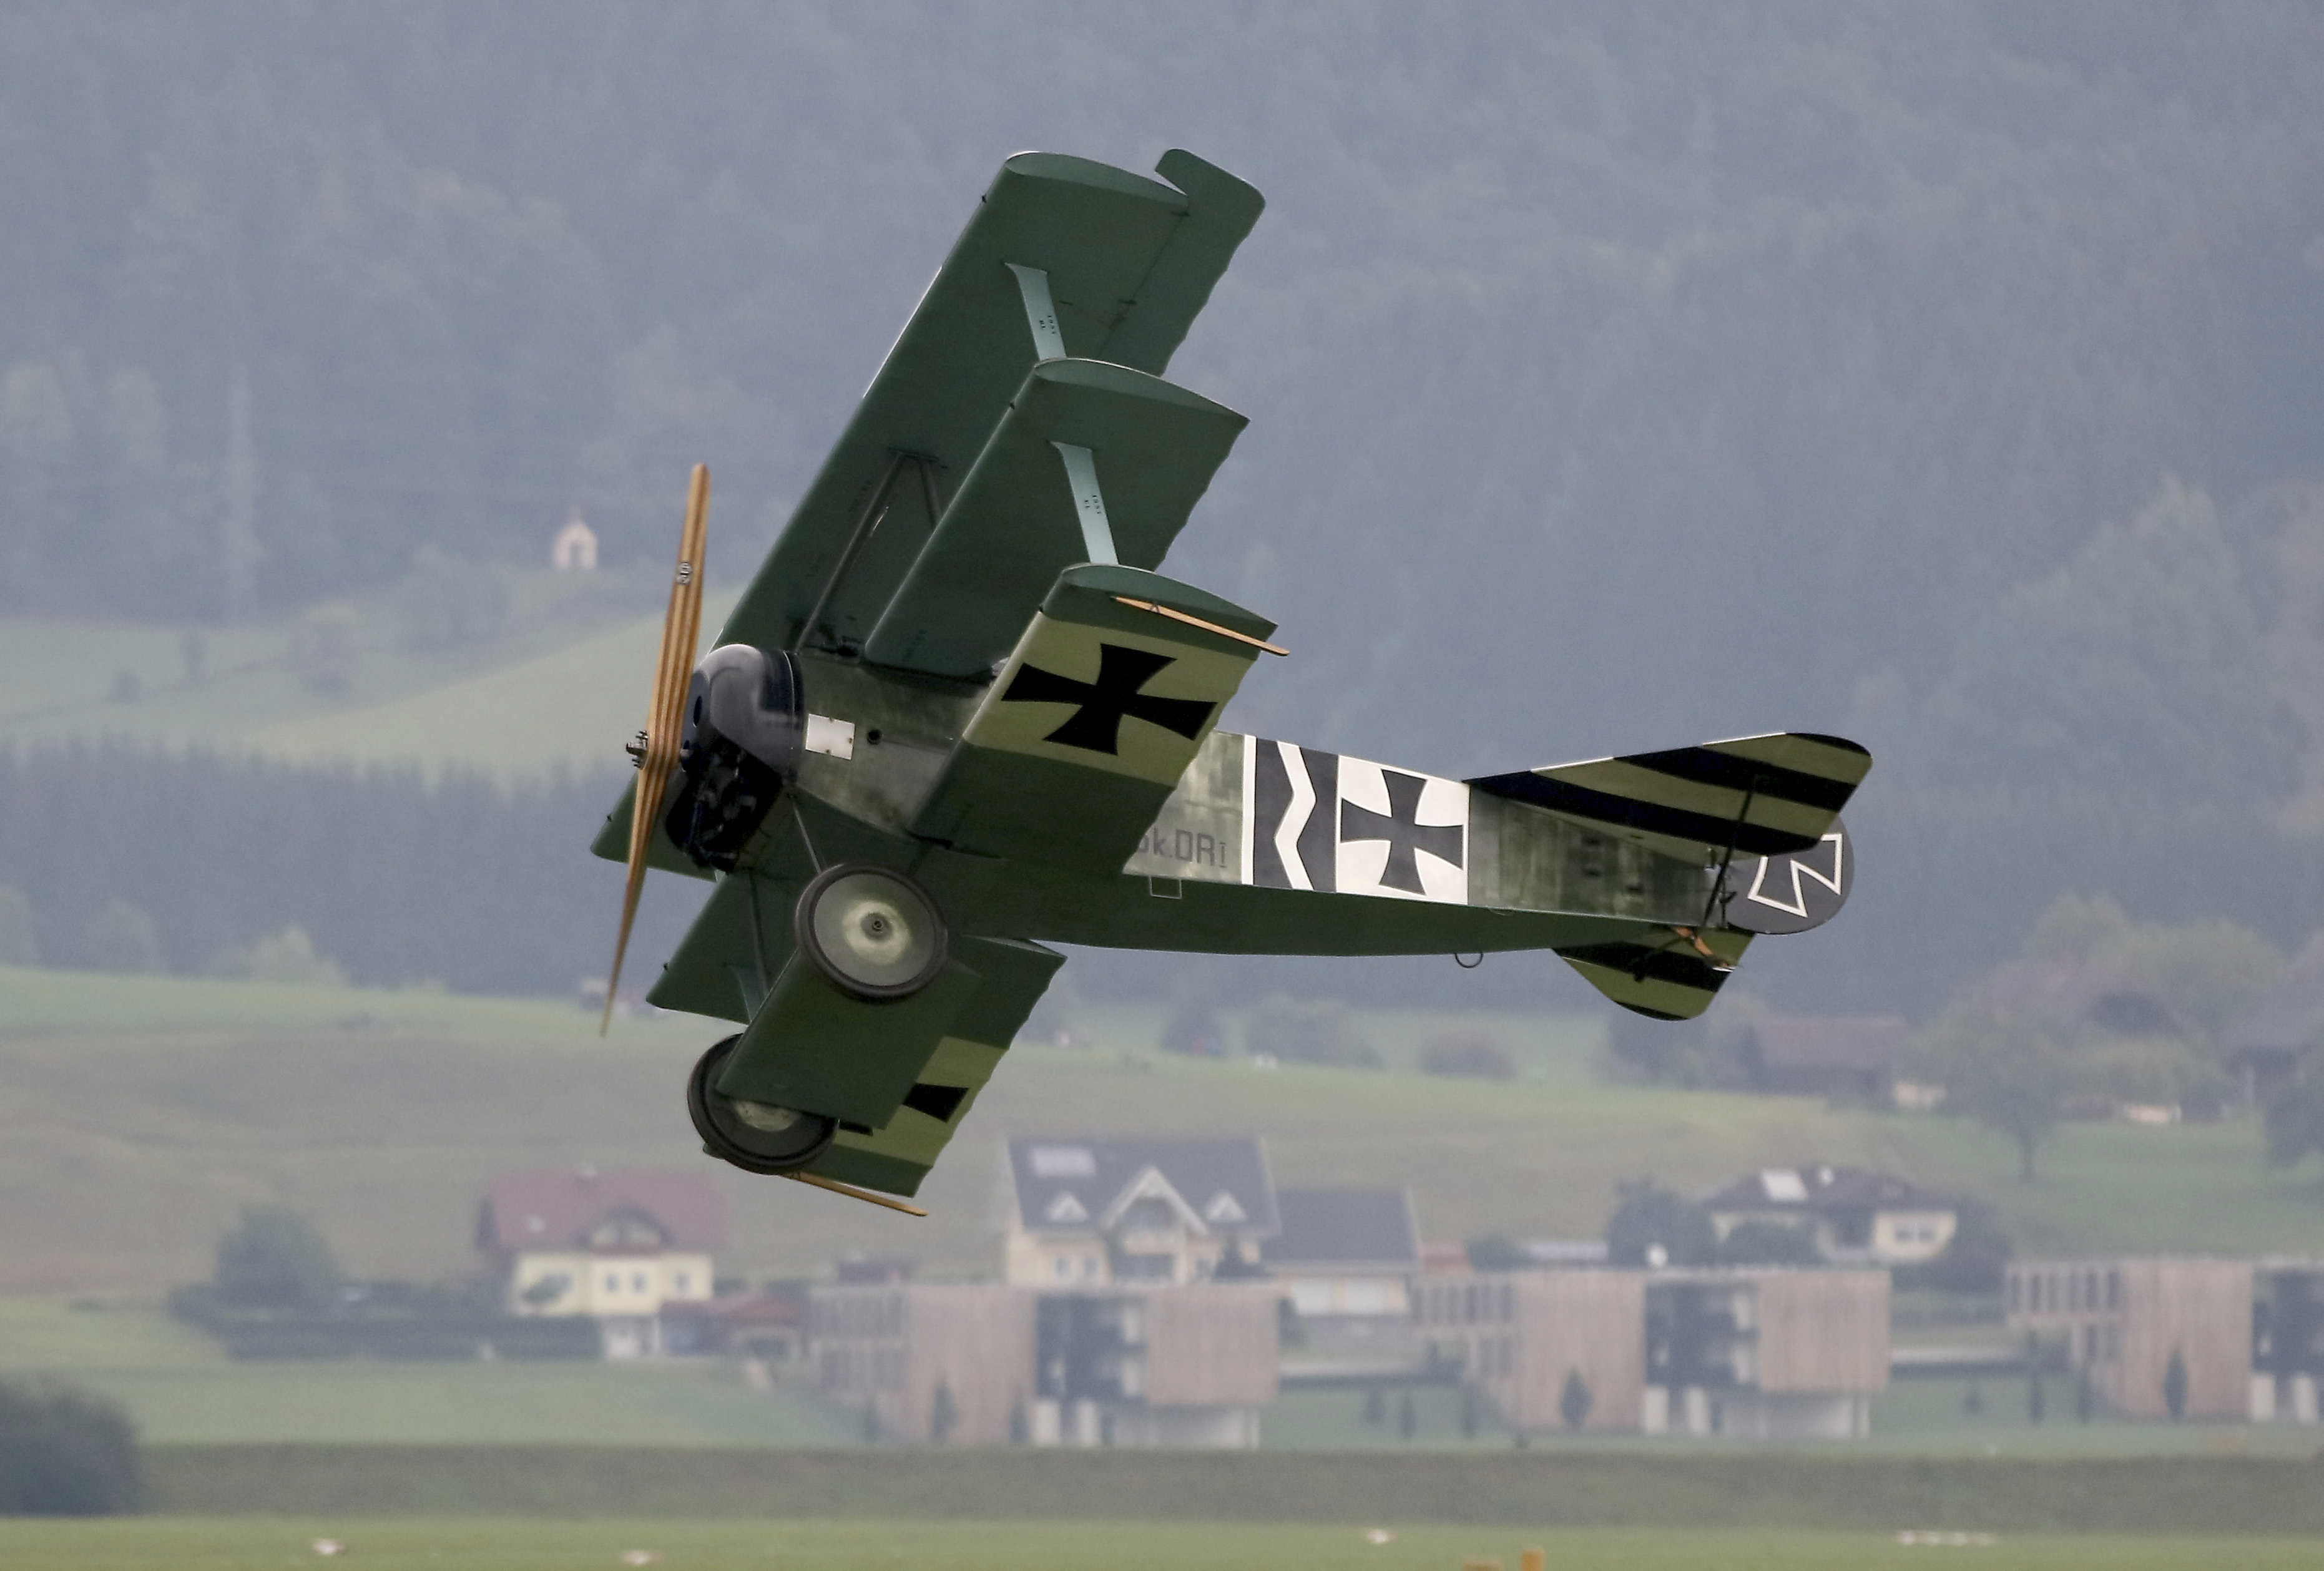 A Fokker DR I performs during the Airpower 19 airplane show in Zeltweg, Styria, Austria, Friday, Sept. 6, 2019. (AP Photo/Ronald Zak)